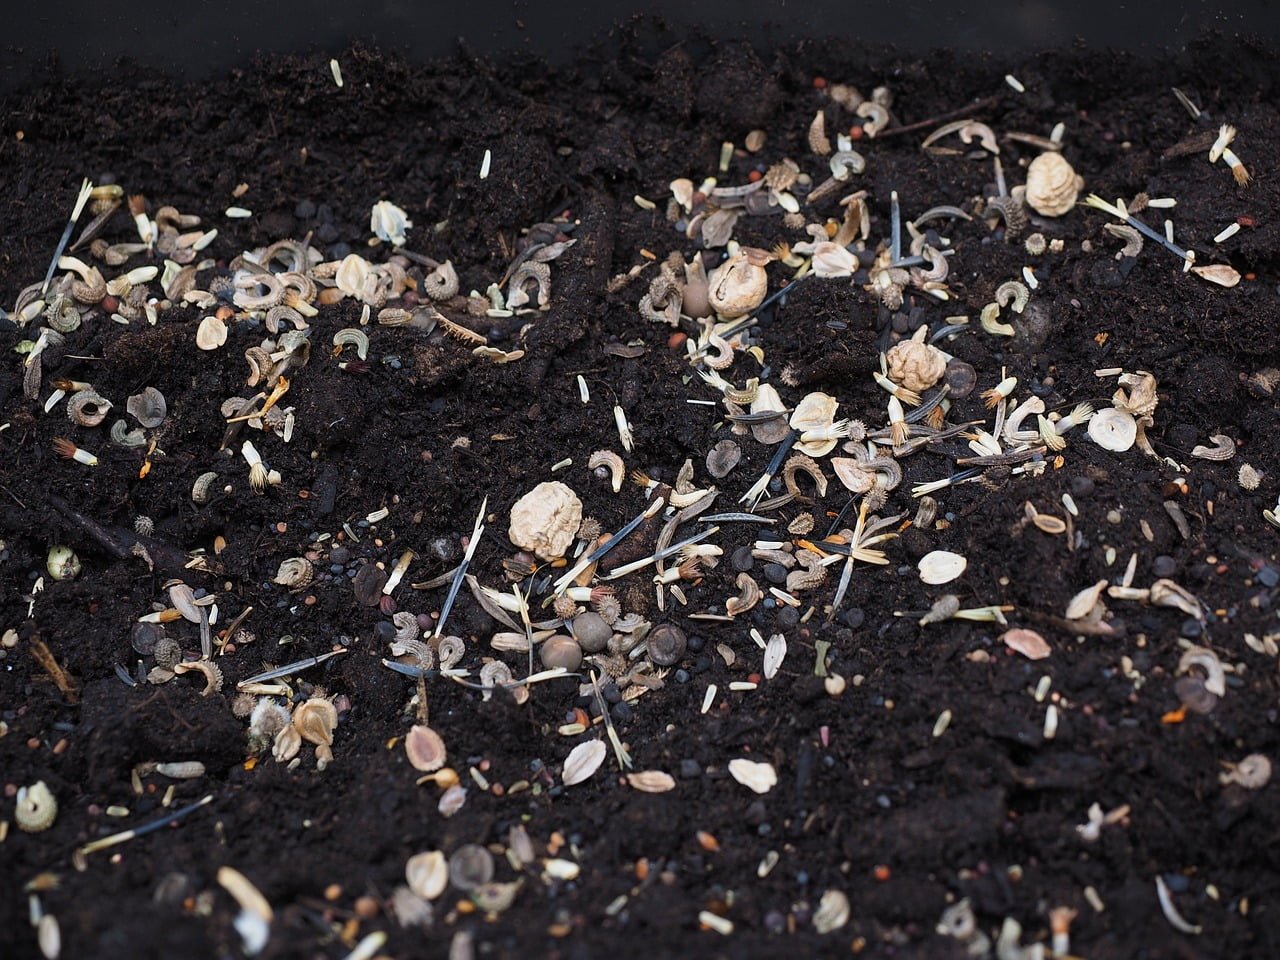 Rich dark soil scattered with various organic compost materials including seeds, small twigs, and decomposing plant matter.